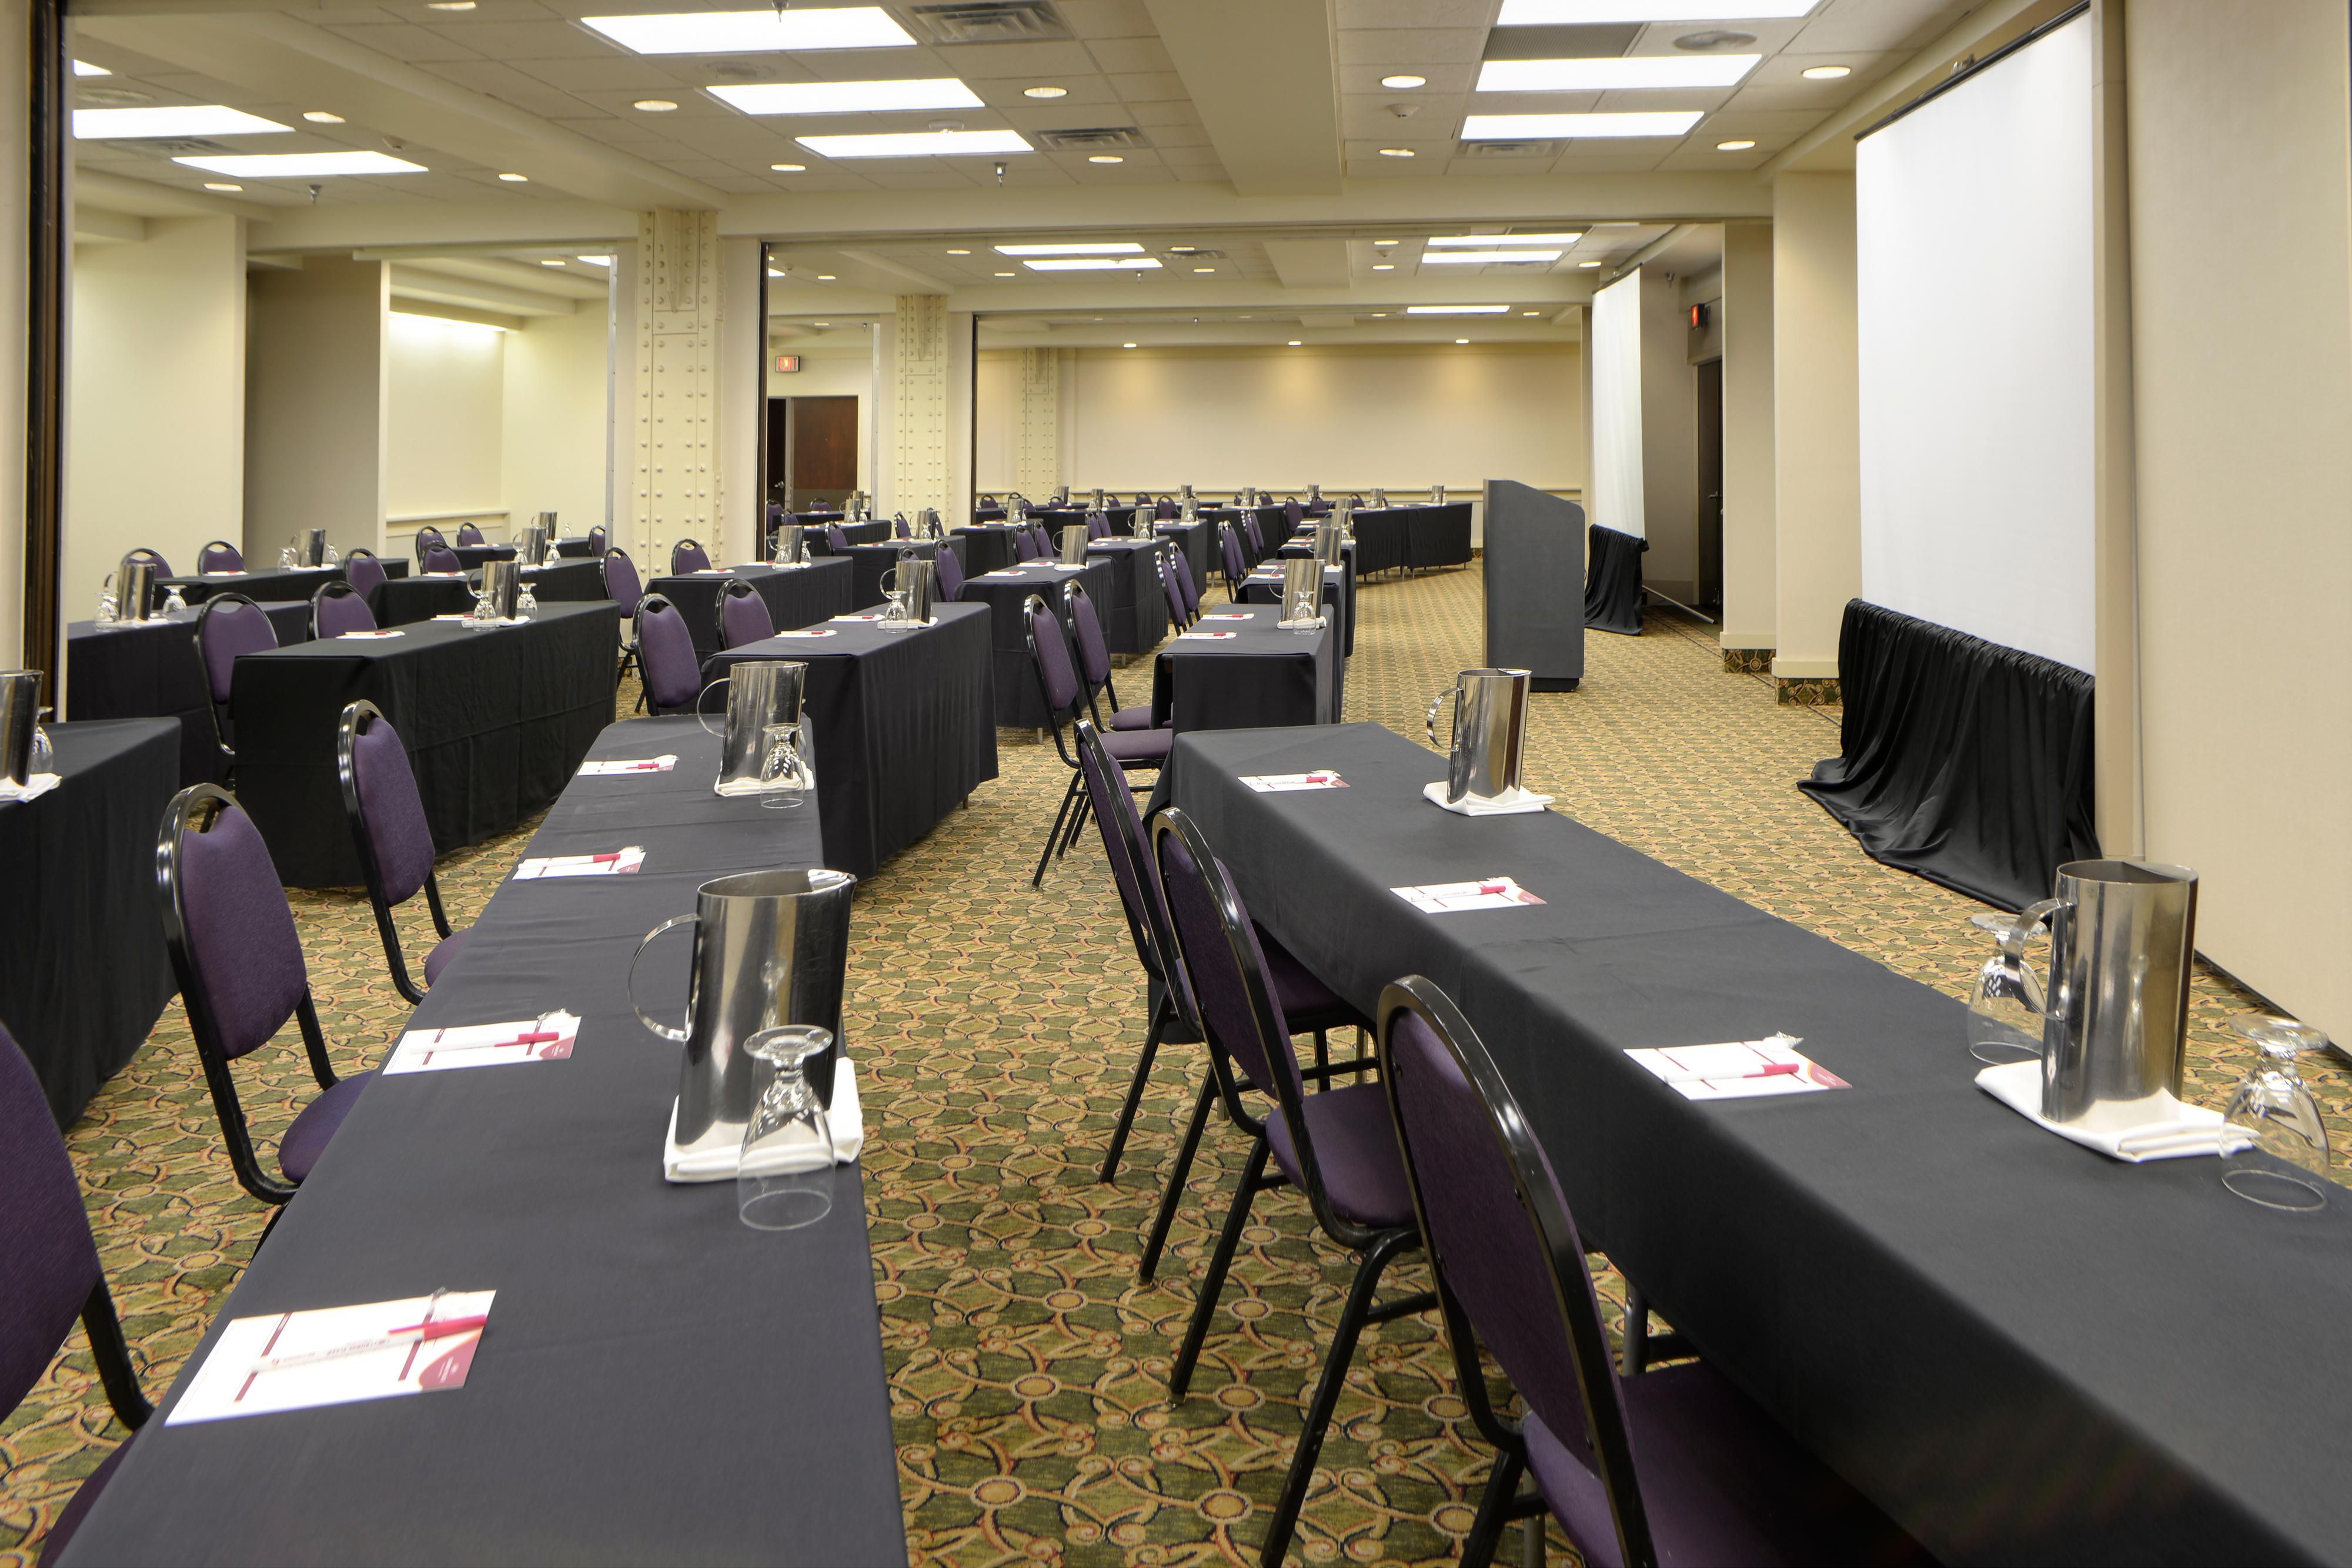 Classroom style is perfect for your next conference.